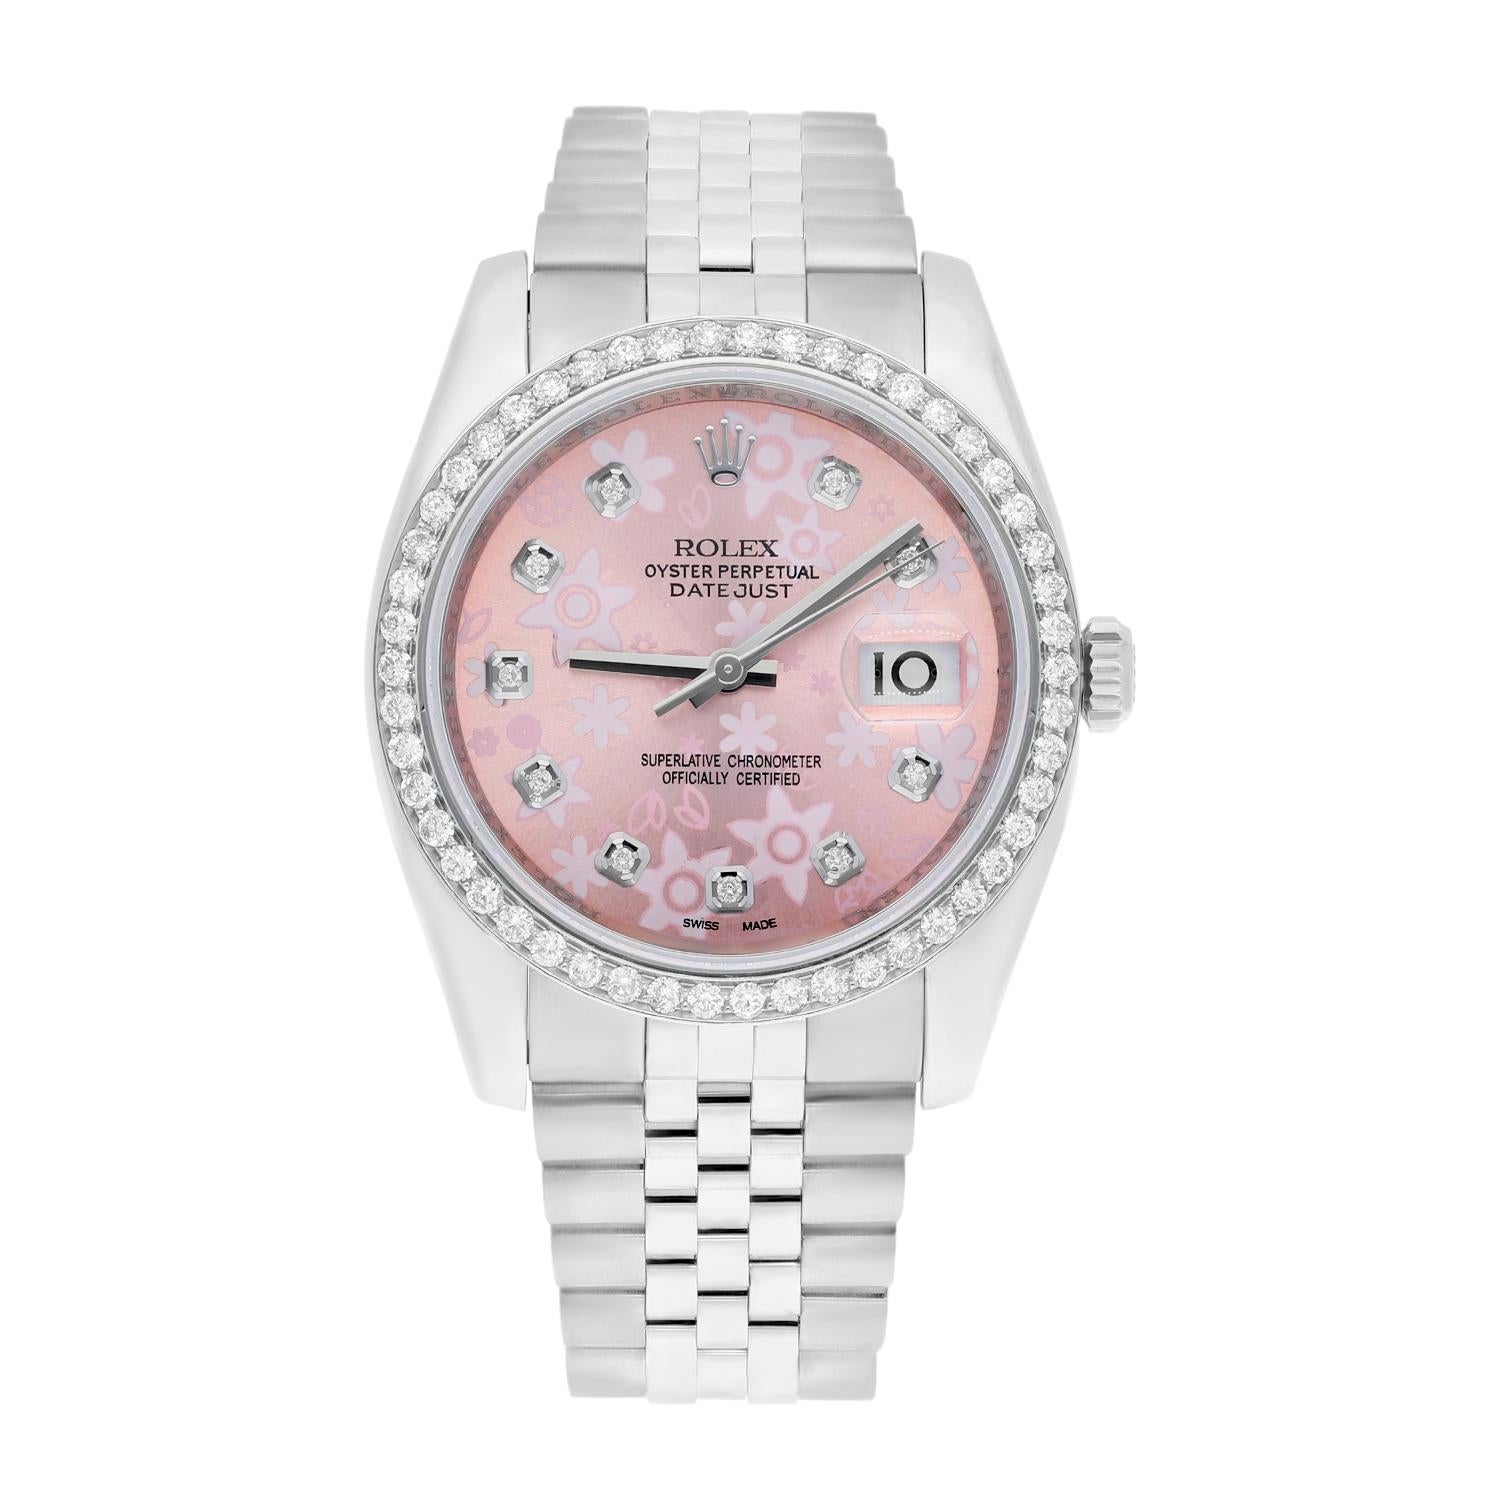 Brand: Rolex
Series: Datejust
Model: 116234
Case Diameter: 36 mm
Bracelet: Jubilee band; stainless steel
Bezel: Custom Diamond Set
Dial: Aftermarket
Carat Weight: 1.62 carats in total diamond weight
The sale includes a Rolex watch box and an